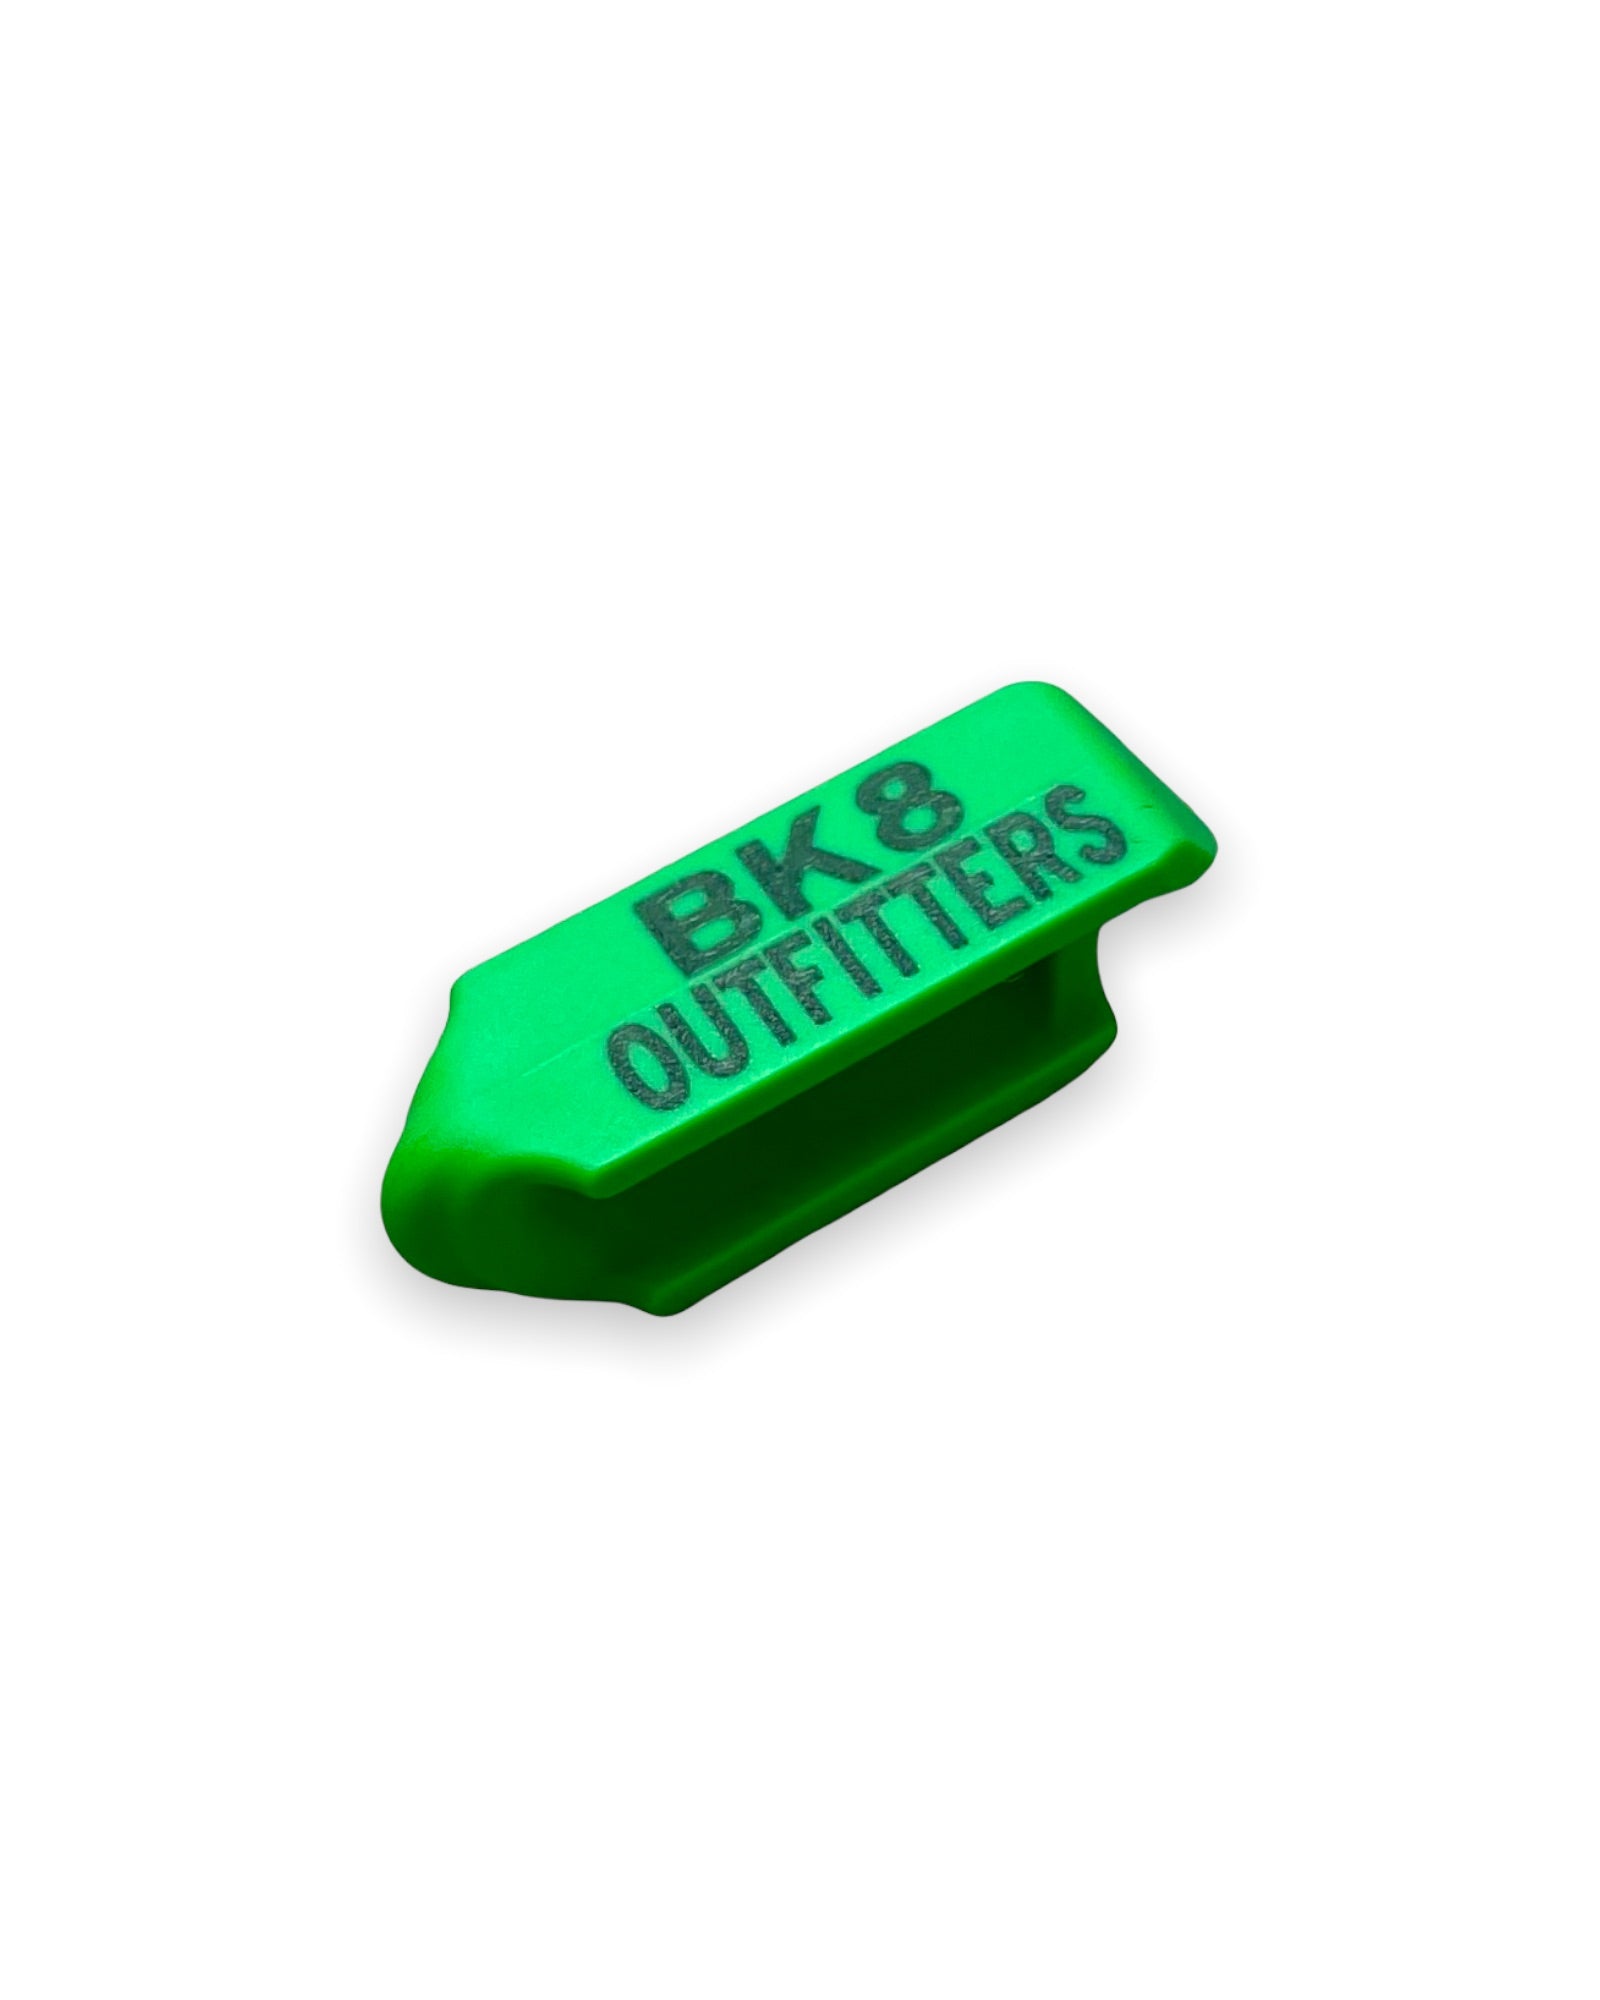 Sheep Tag | BK8 Outfitters | 2019 Green